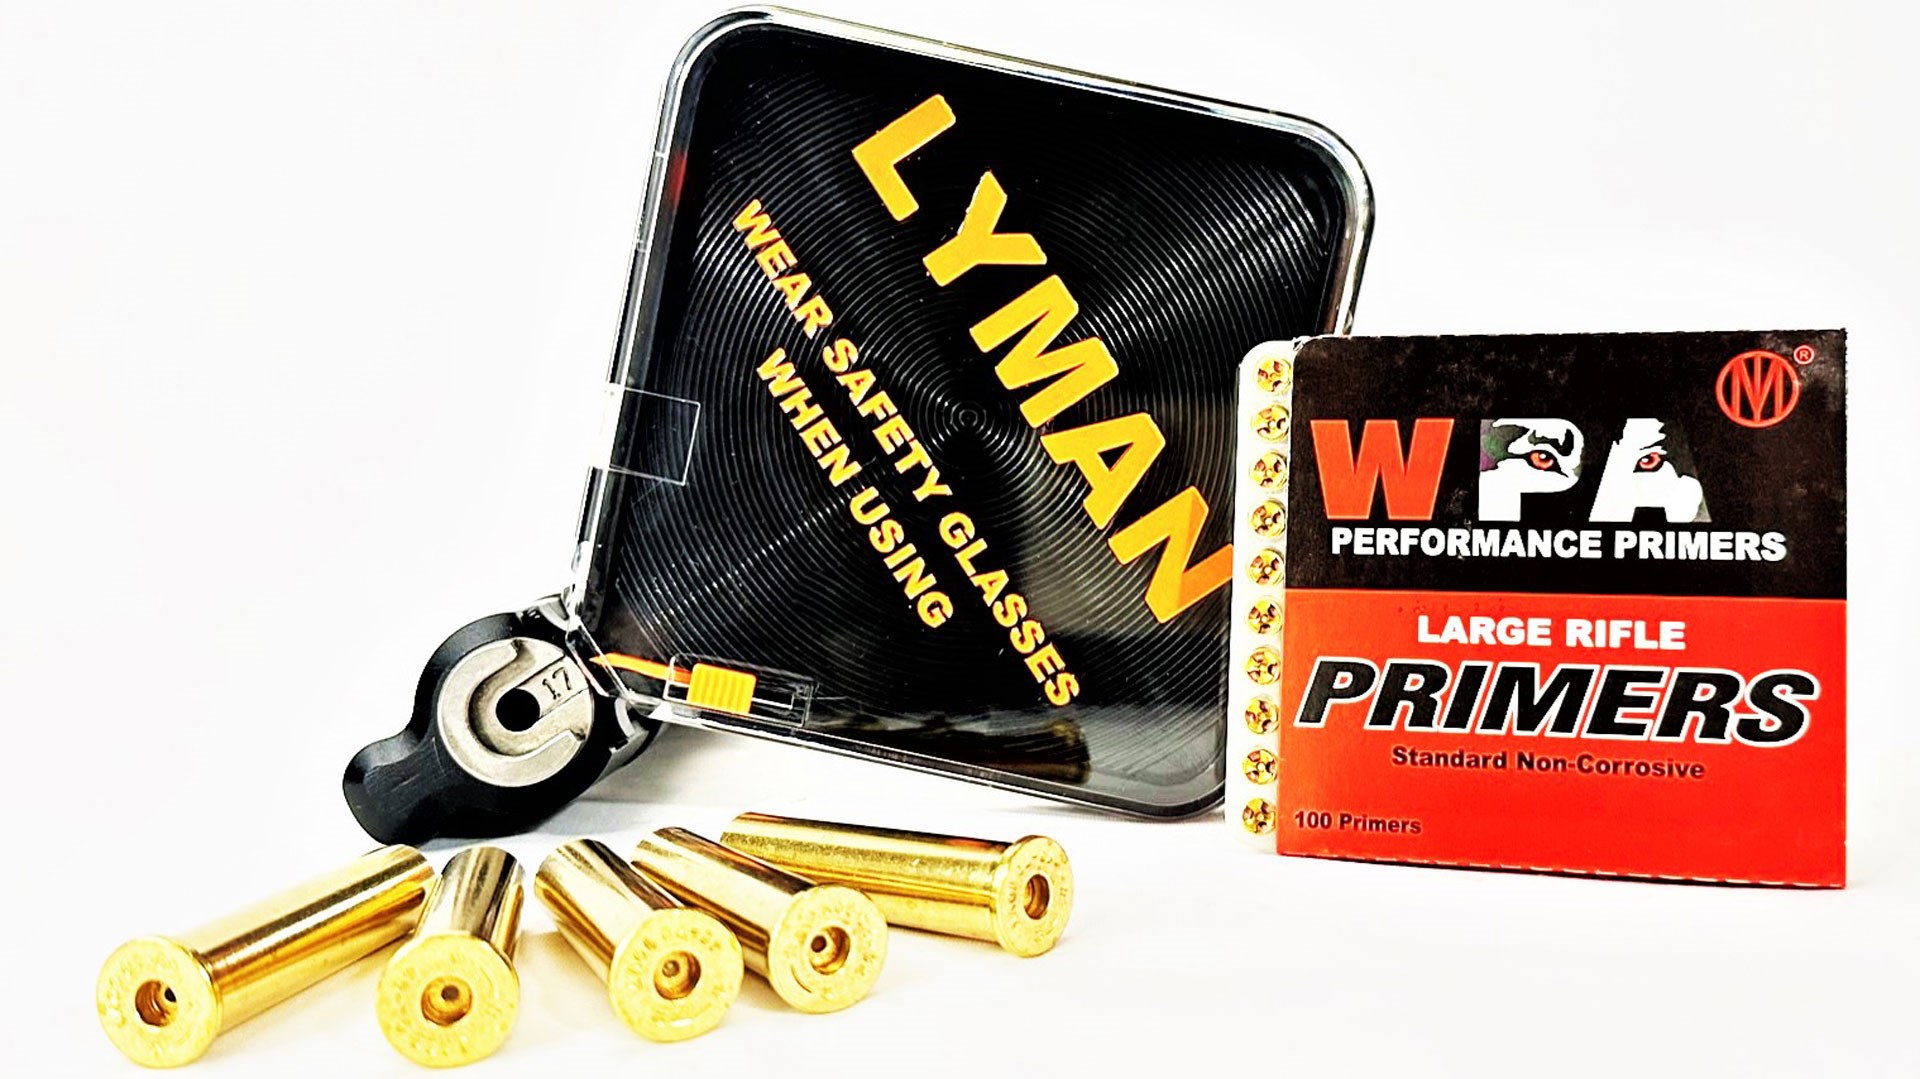 Lyman cases and wolf primers